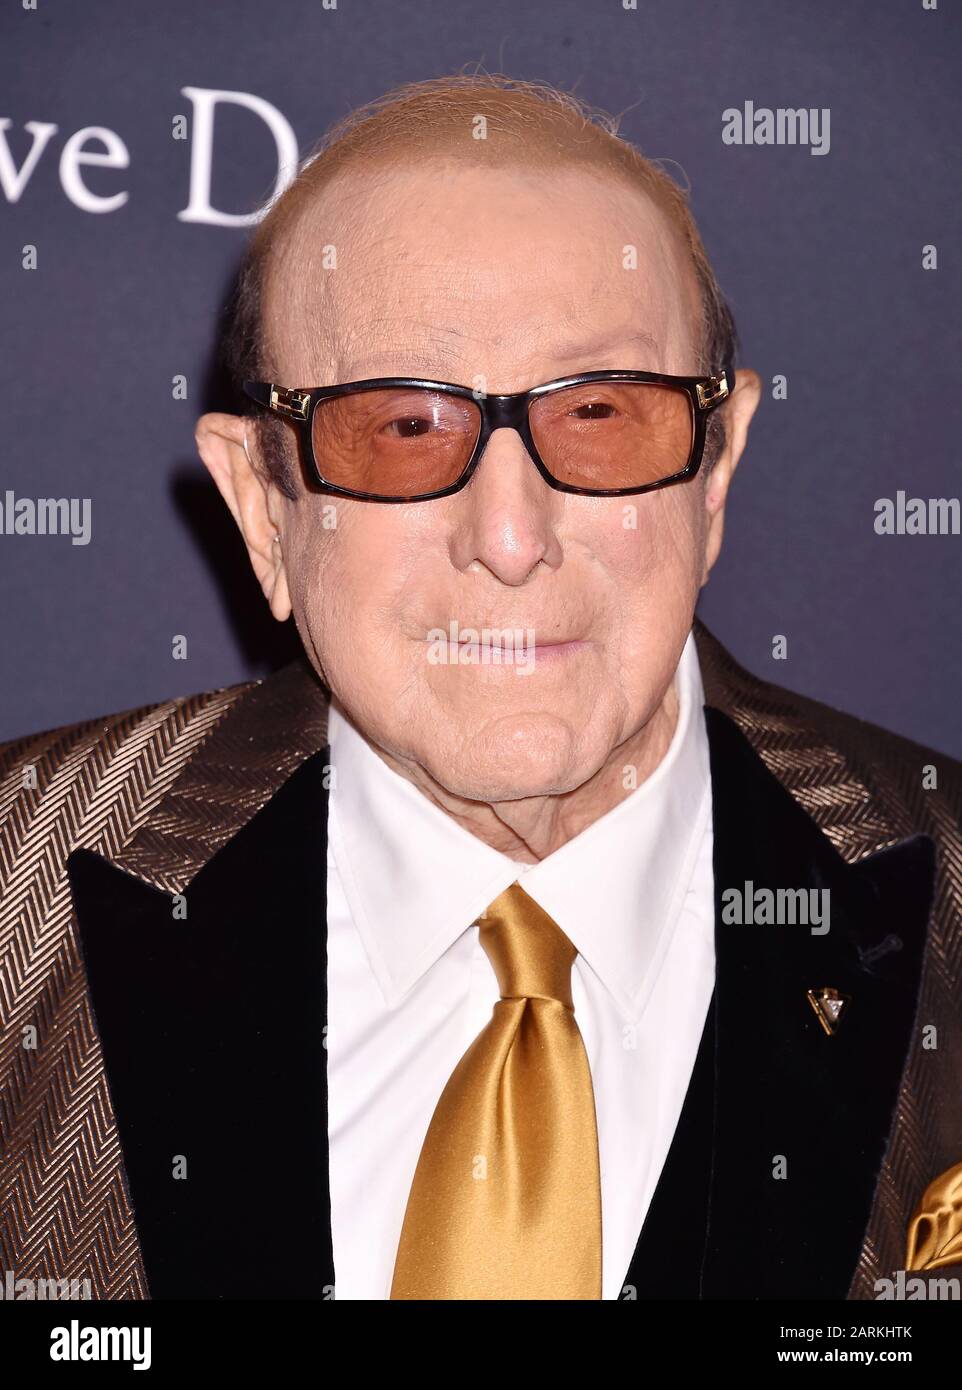 BEVERLY HILLS, CA - JANUARY 25: Clive Davis attends the Pre-GRAMMY Gala and GRAMMY Salute to Industry Icons Honoring Sean 'Diddy' Combs on January 25, 2020 in Beverly Hills, California. Stock Photo